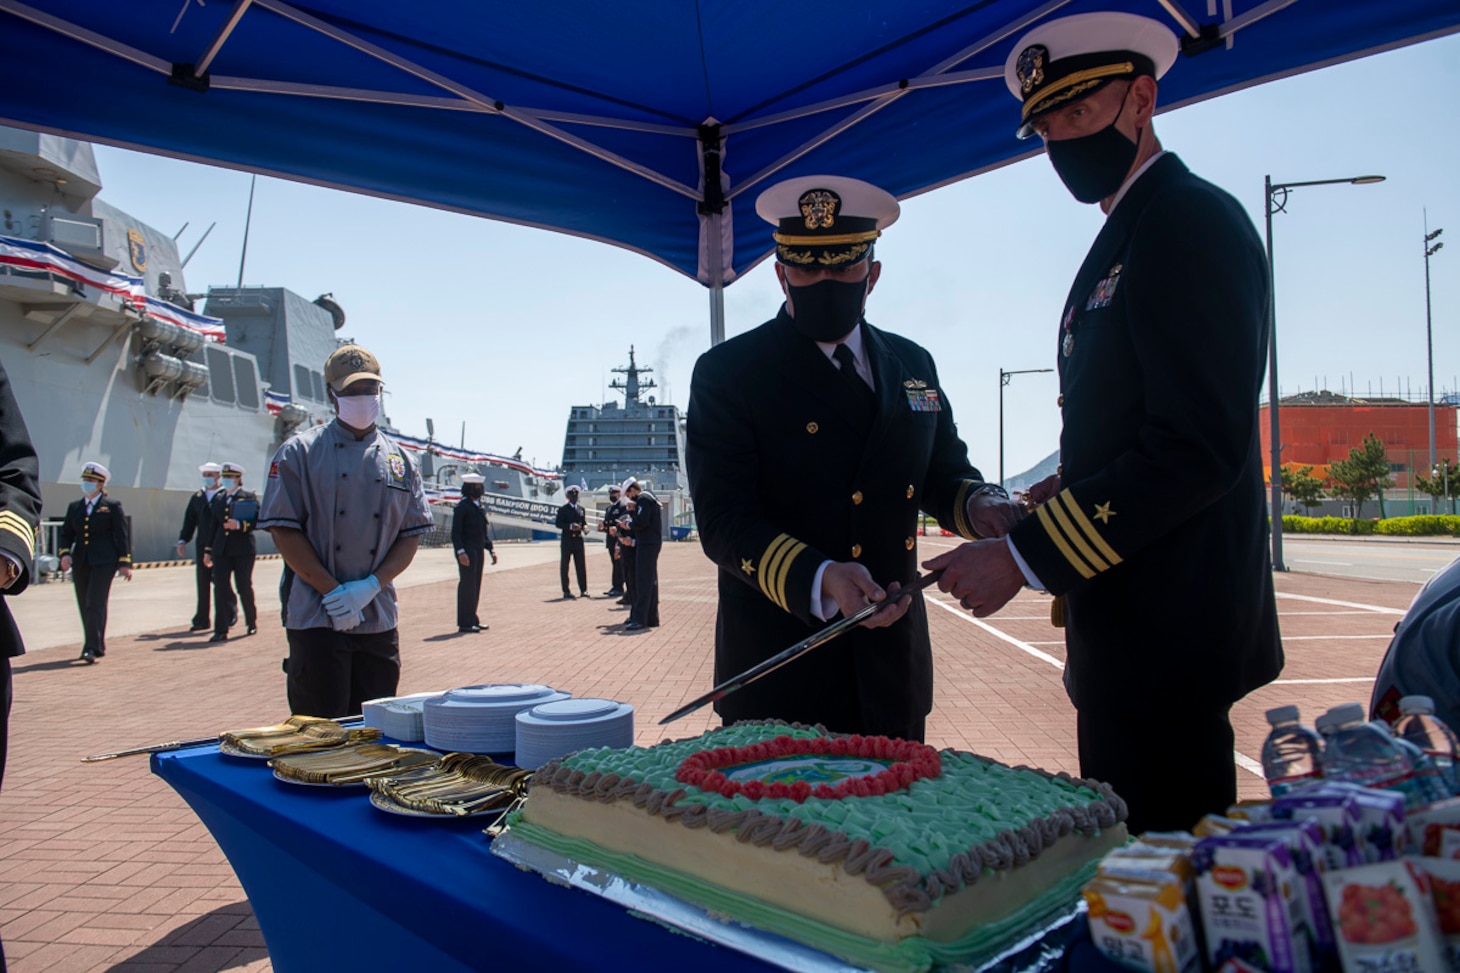 Cmdr. William Bencini, Commanding Officer, and Cmdr. Adam Soukup cut the ceremonial cake during Change of Command for the Arleigh Burke-class guided-missile destroyer USS Sampson (DDG 102). Sampson is on a scheduled deployment in the U.S. 7th Fleet area of operations to enhance interoperability with alliances and partnerships while serving as a ready-response force in support of a free and open Indo-Pacific region.